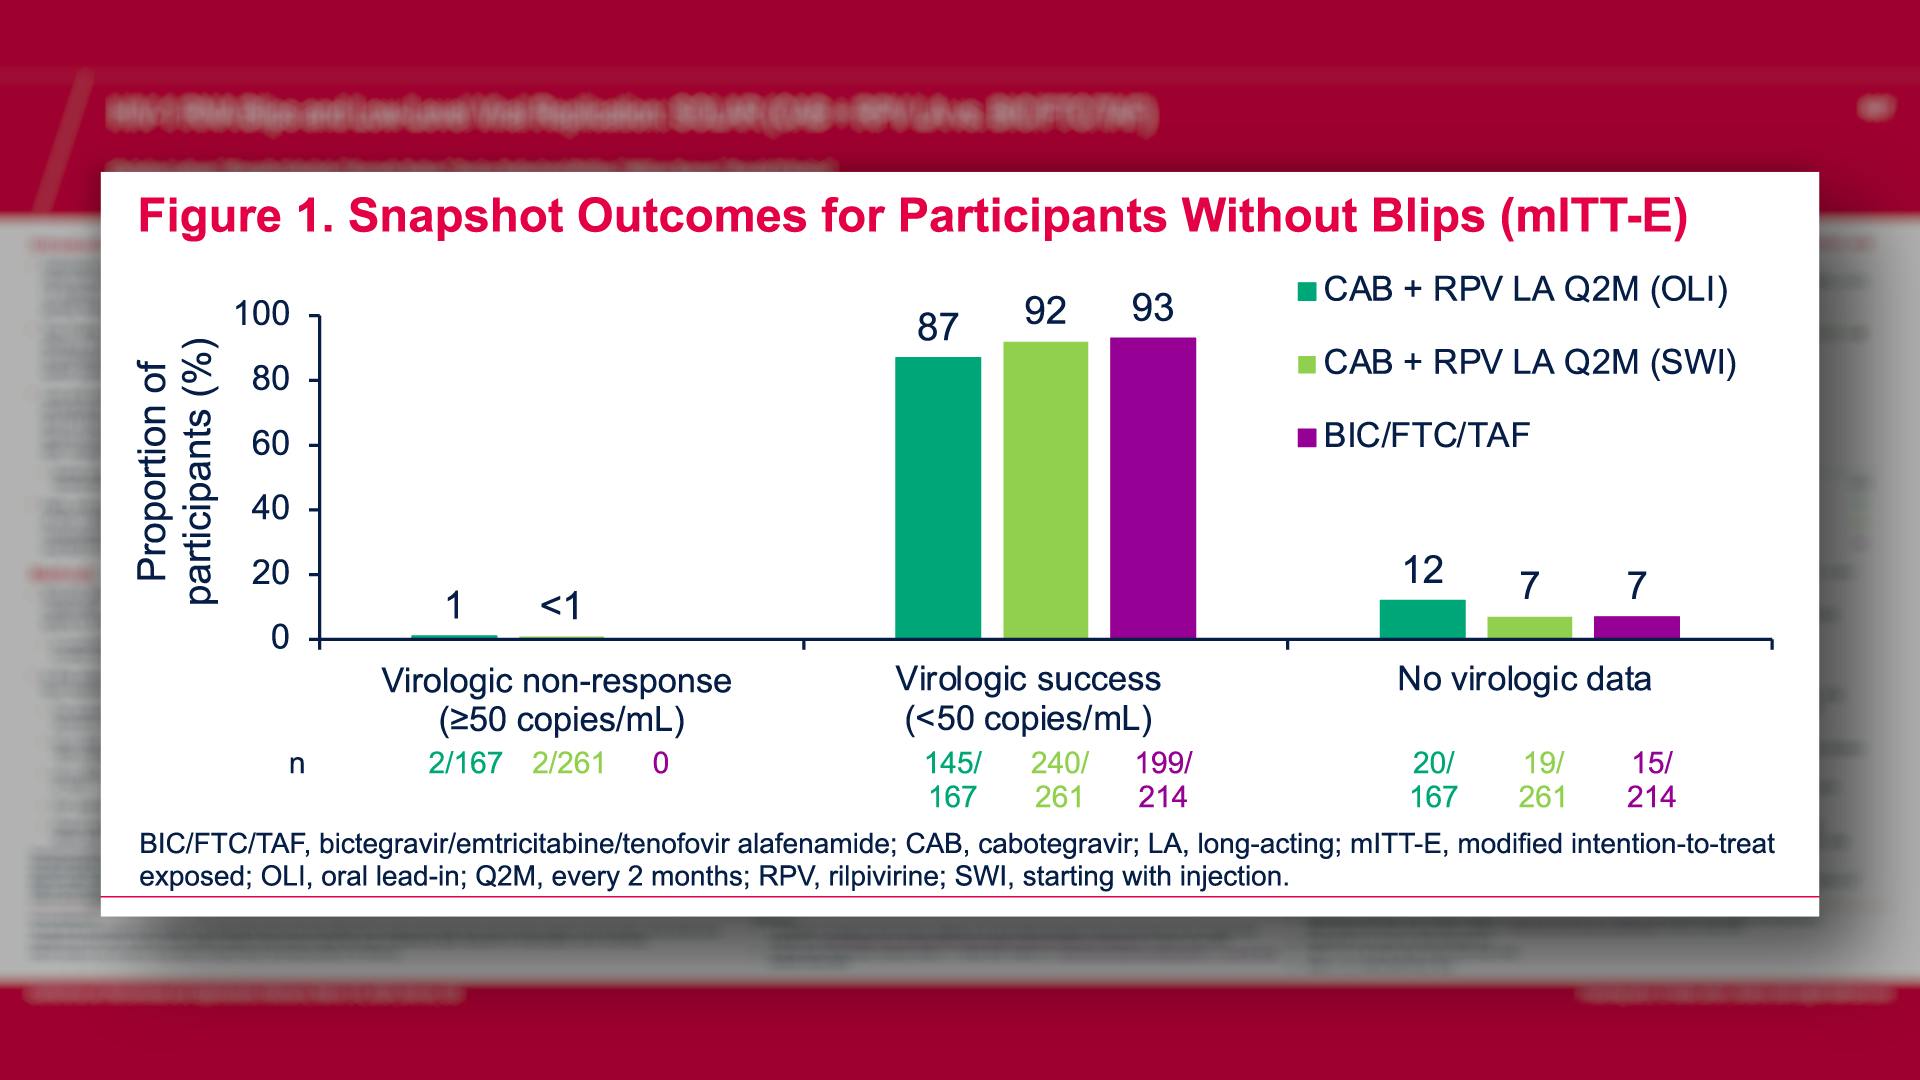 Snapshot Outcomes for Participants Without Blips (mITT-E)